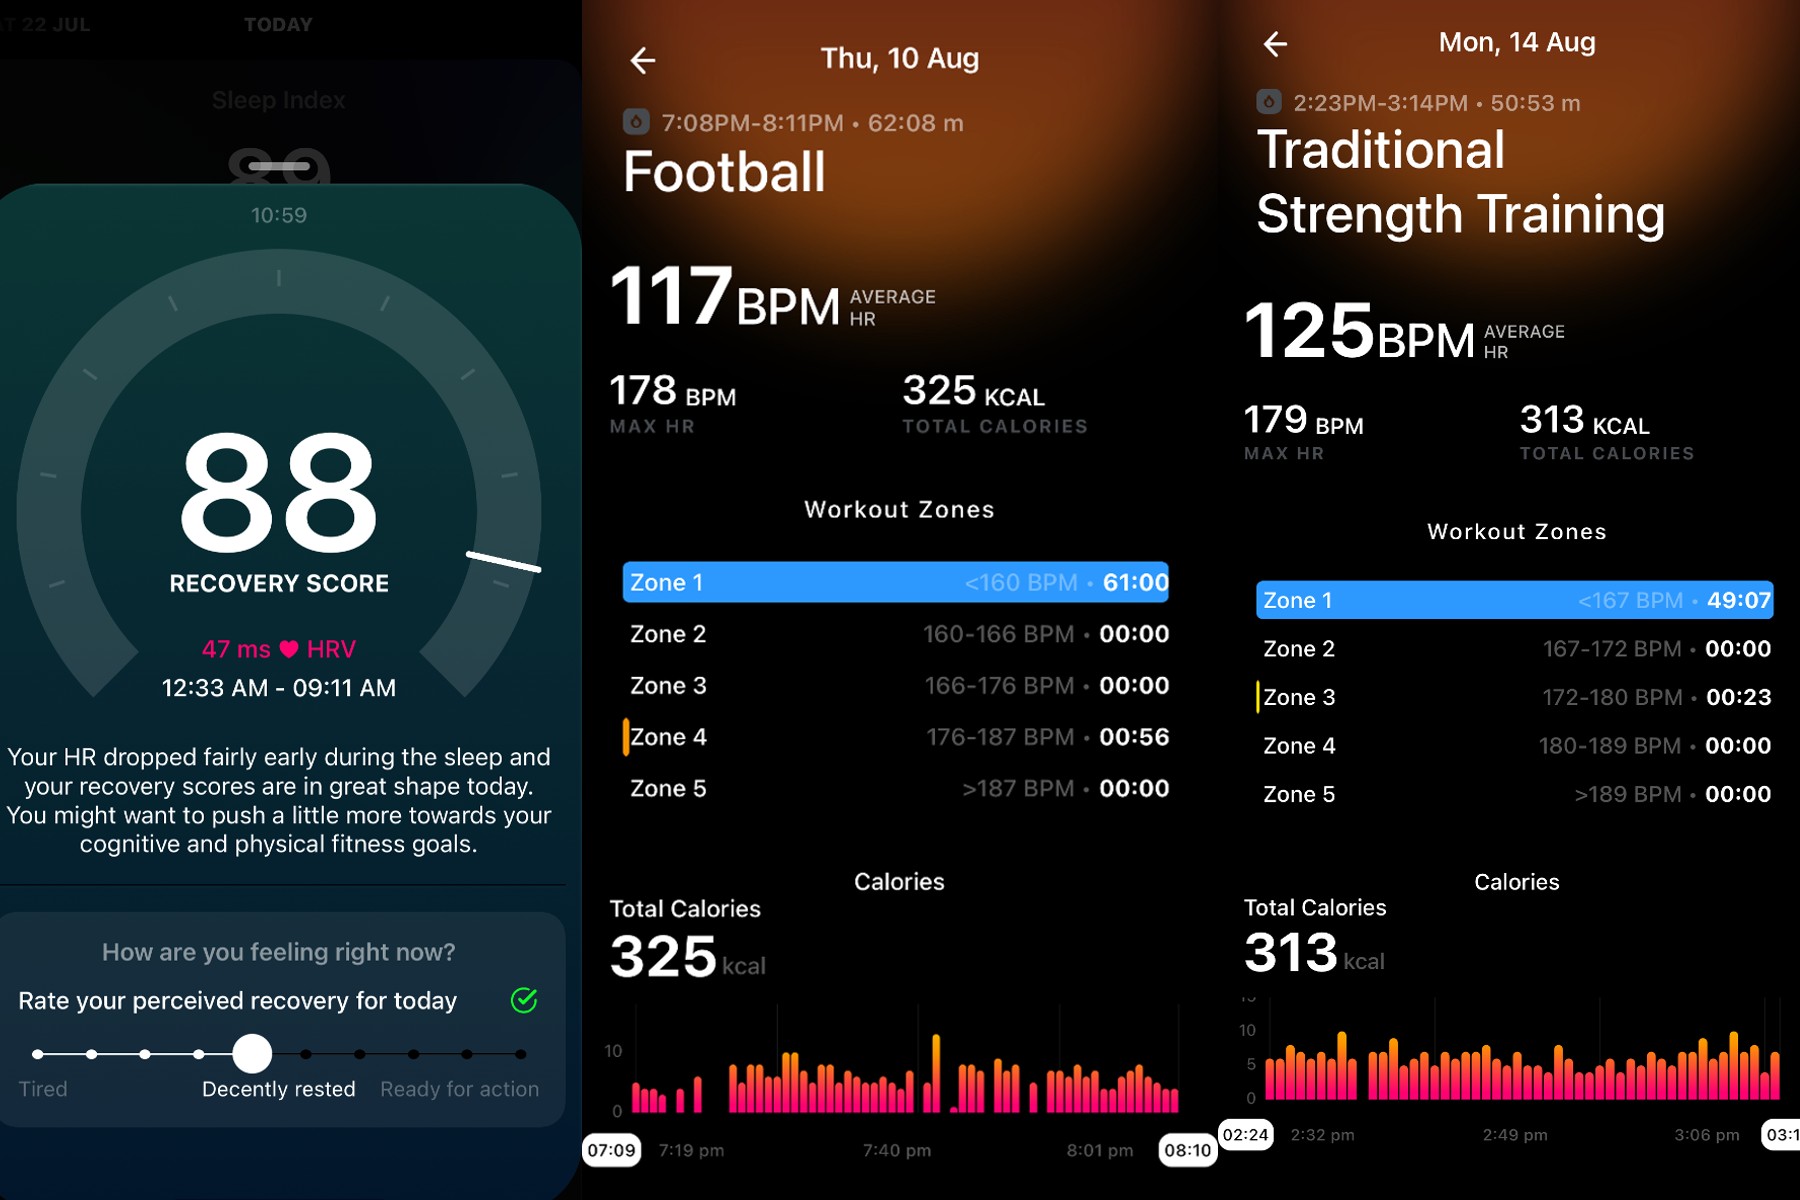 The recovery score and fitness tracker are good guidance for how you're performing.